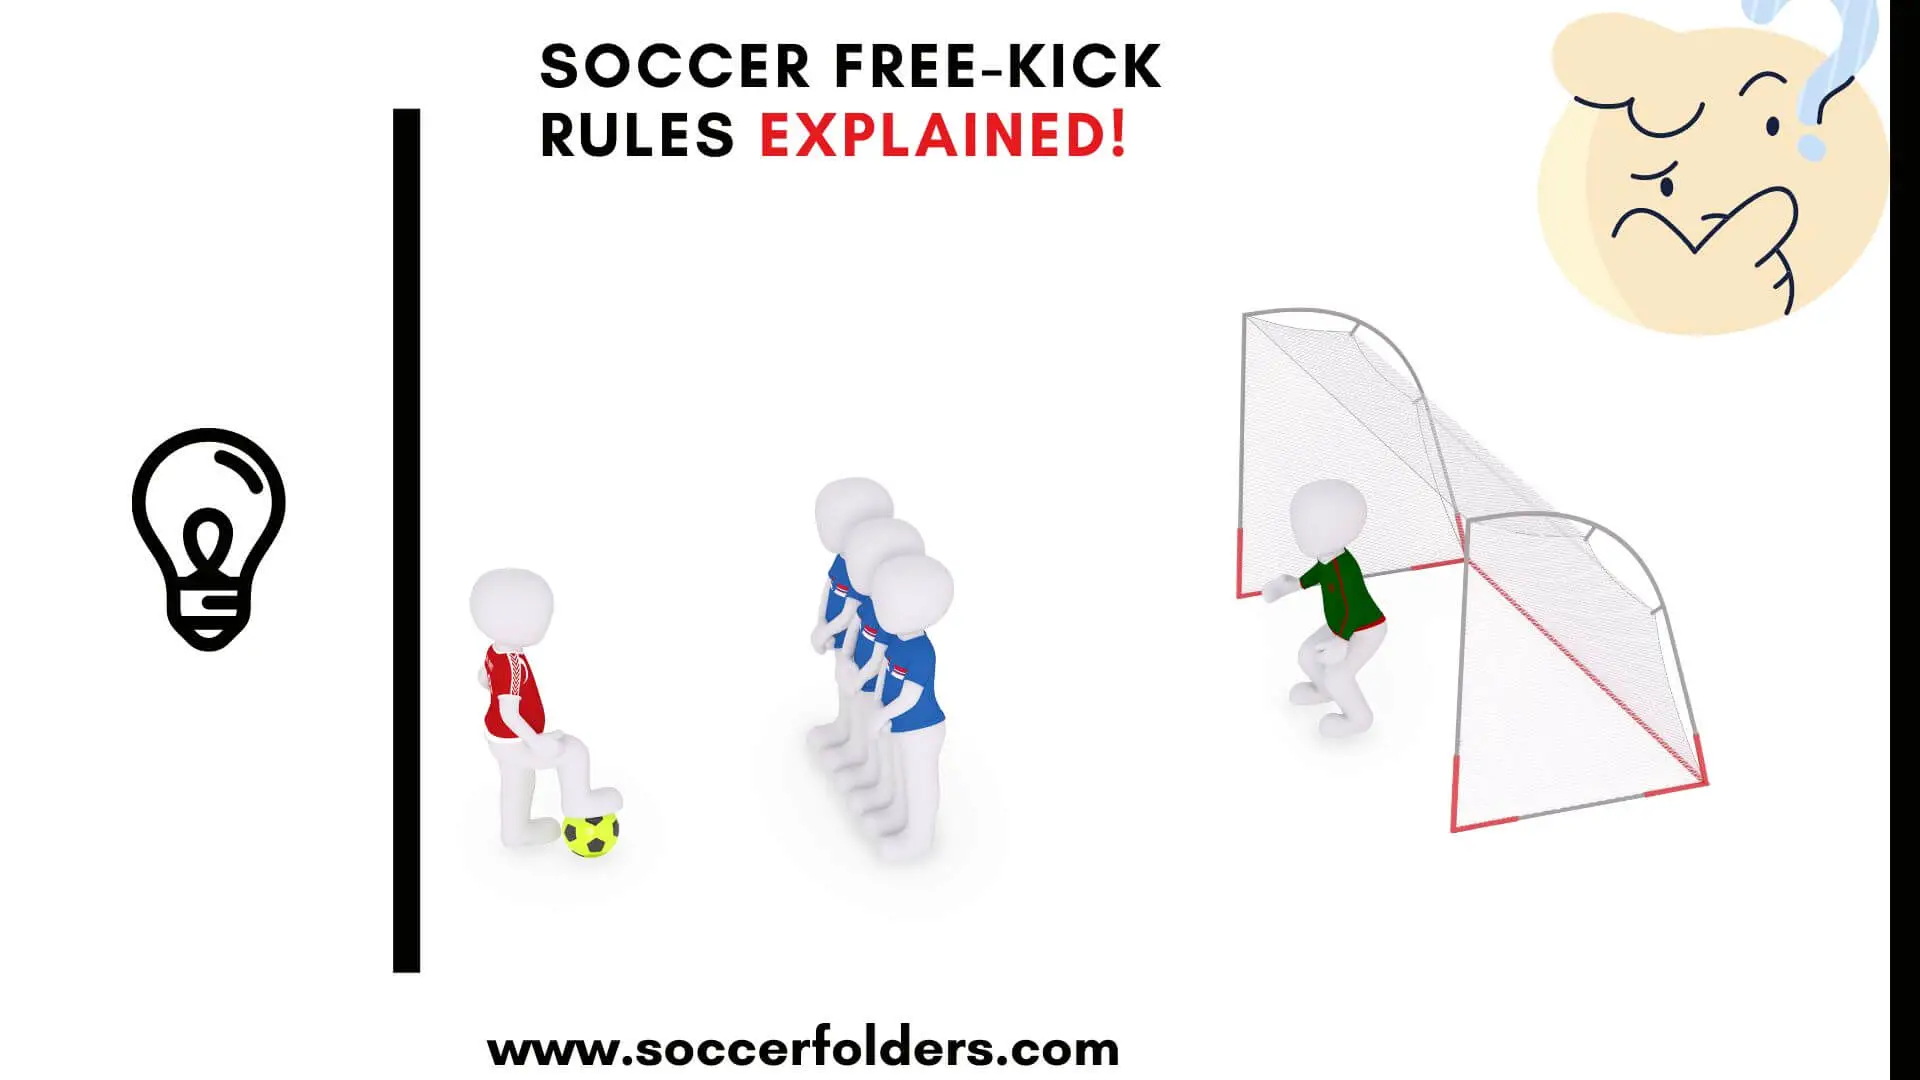 Soccer Free Kick rules - Featured image